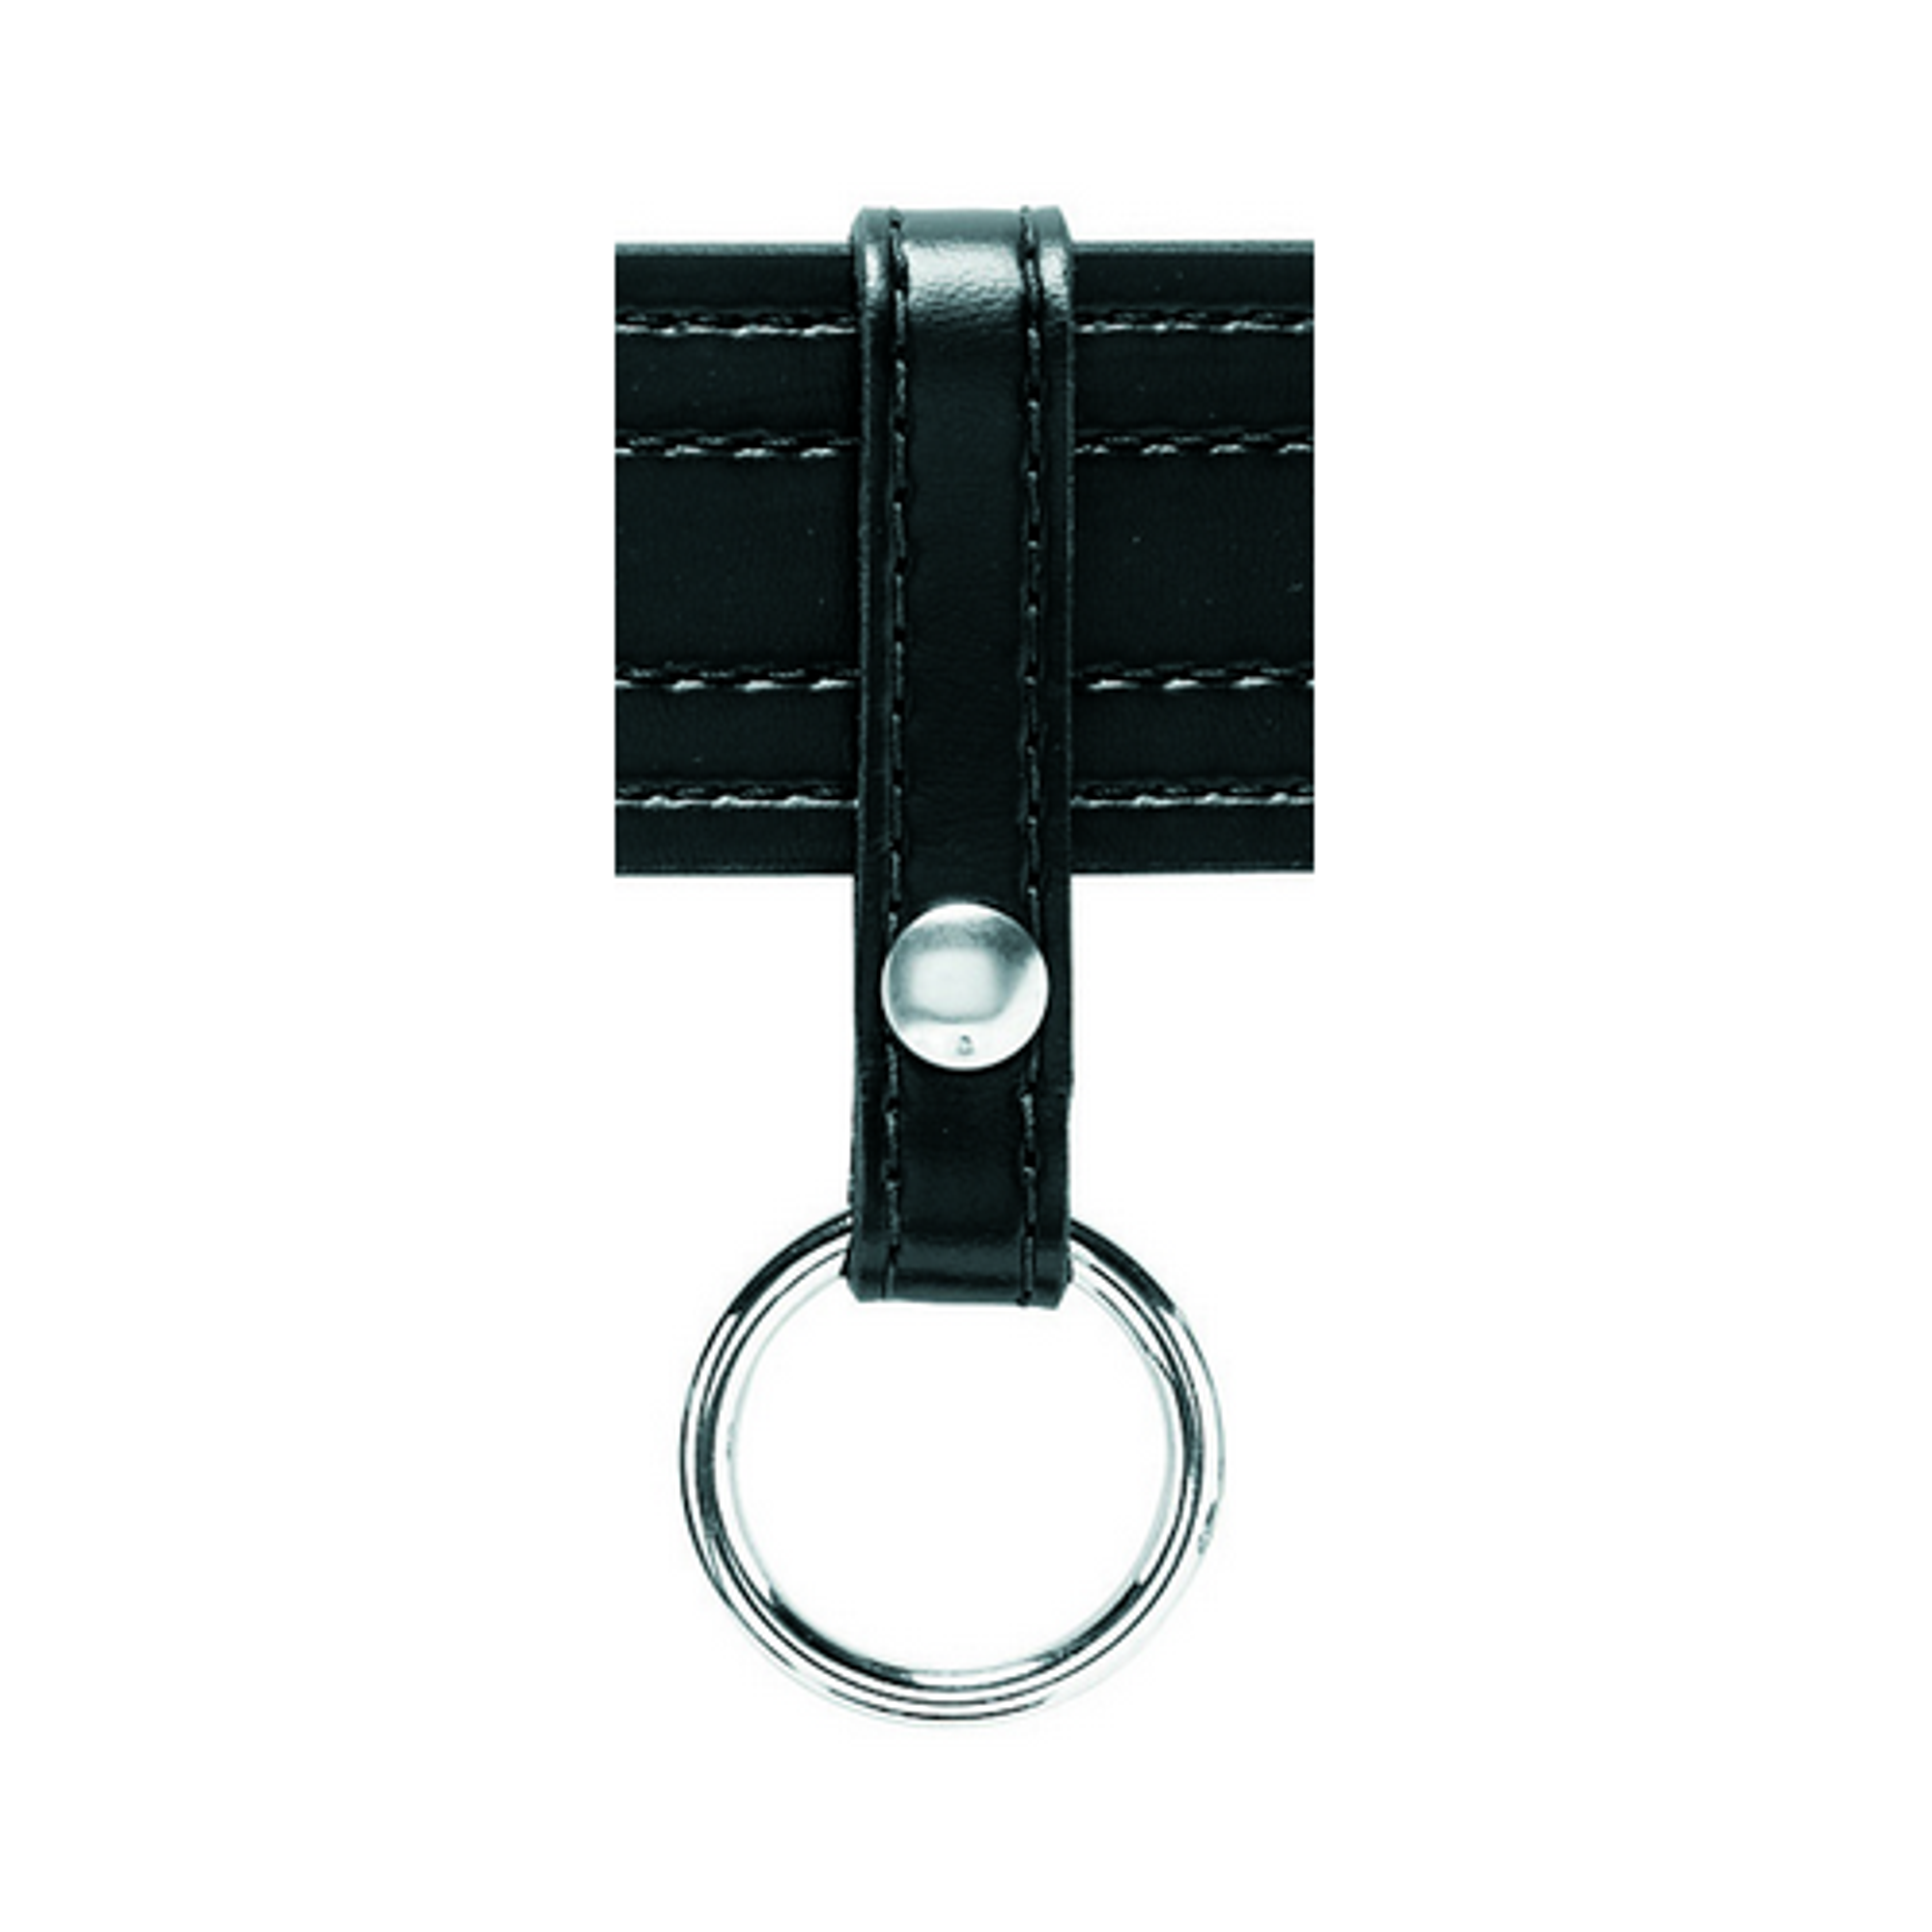 Model 67s Baton Ring With Snap - KR67S-2